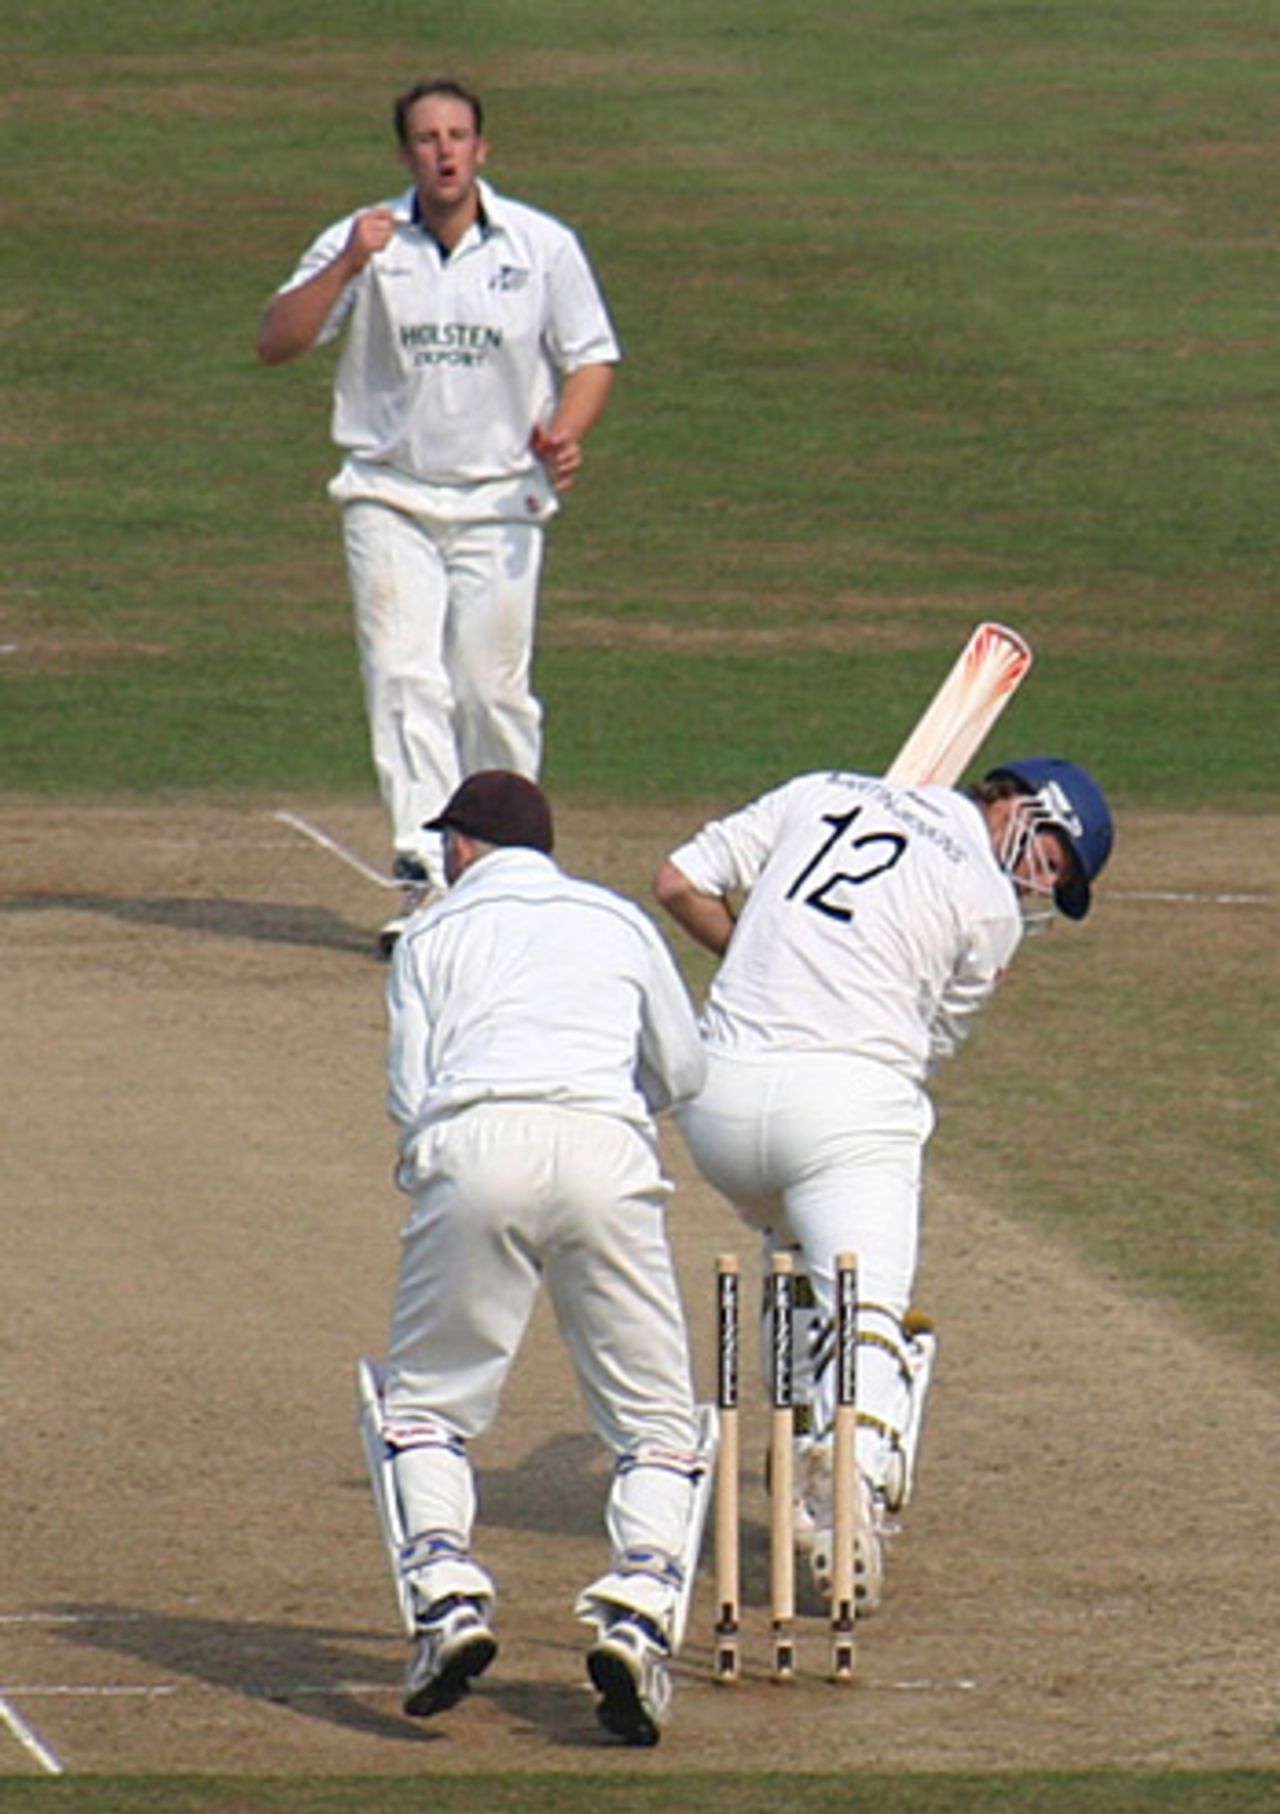 Niall O'Brien neatly stumps Robin Martin-Jenkins off James Tredwell, Sussex v Kent, Hove, September 22, 2005